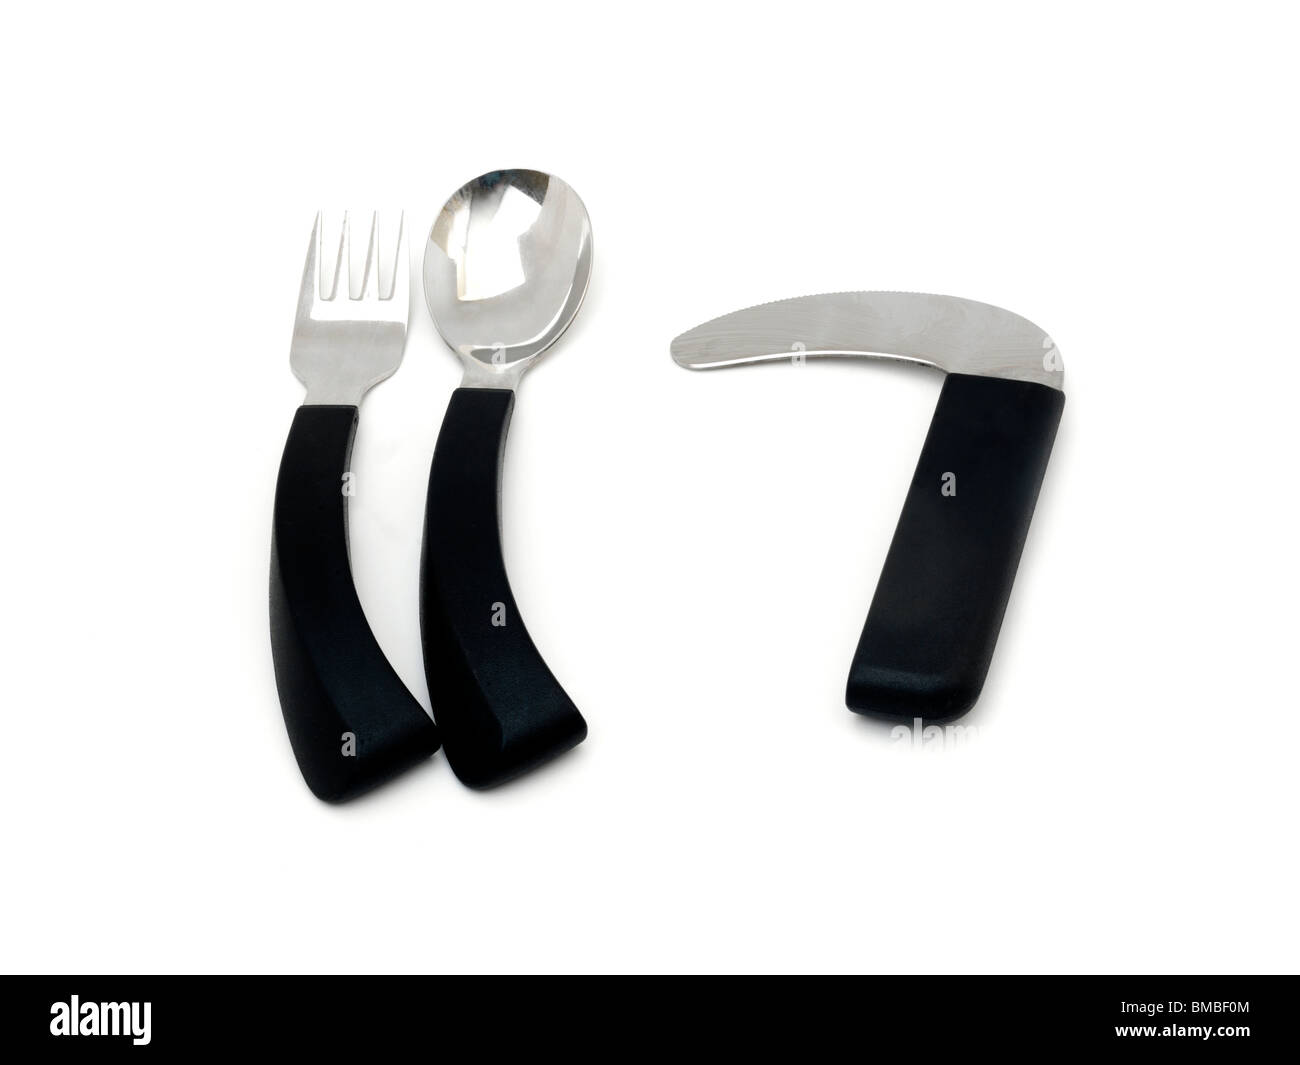 Amefa Angled Contoured Cutlery For People Who Have Restricted Wrist Or Finger Movement Stock Photo